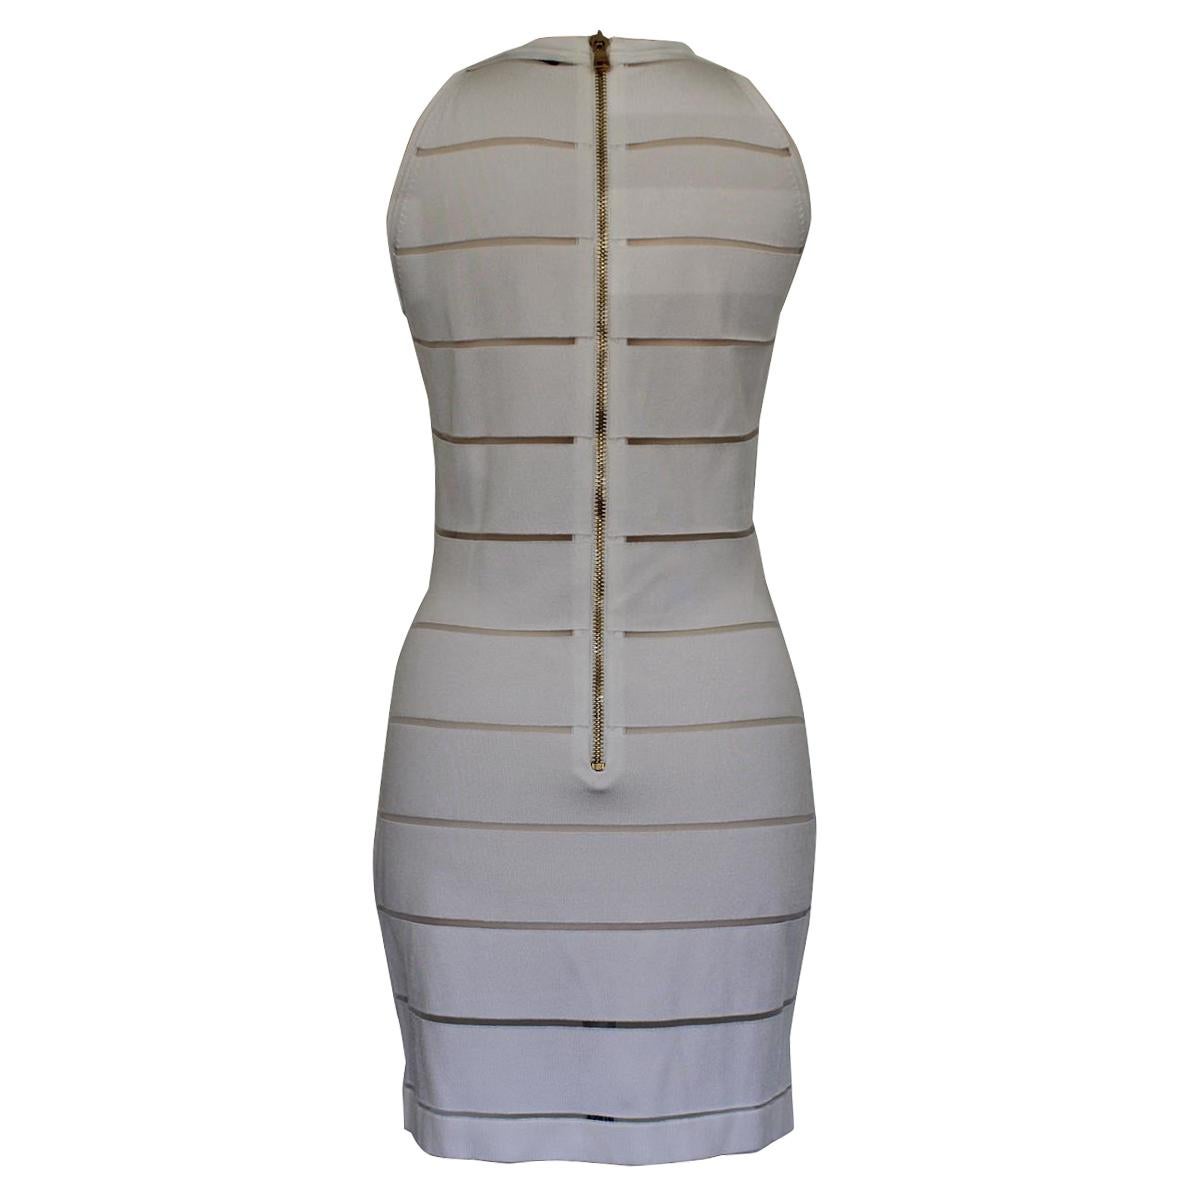 Beautiful Balmain dress
Viscose (88%) Lycra
White color
Sleeveless
Zip on the back
Total length cm 80 (31.4 inches)
Worldwide express shipping included in the price !